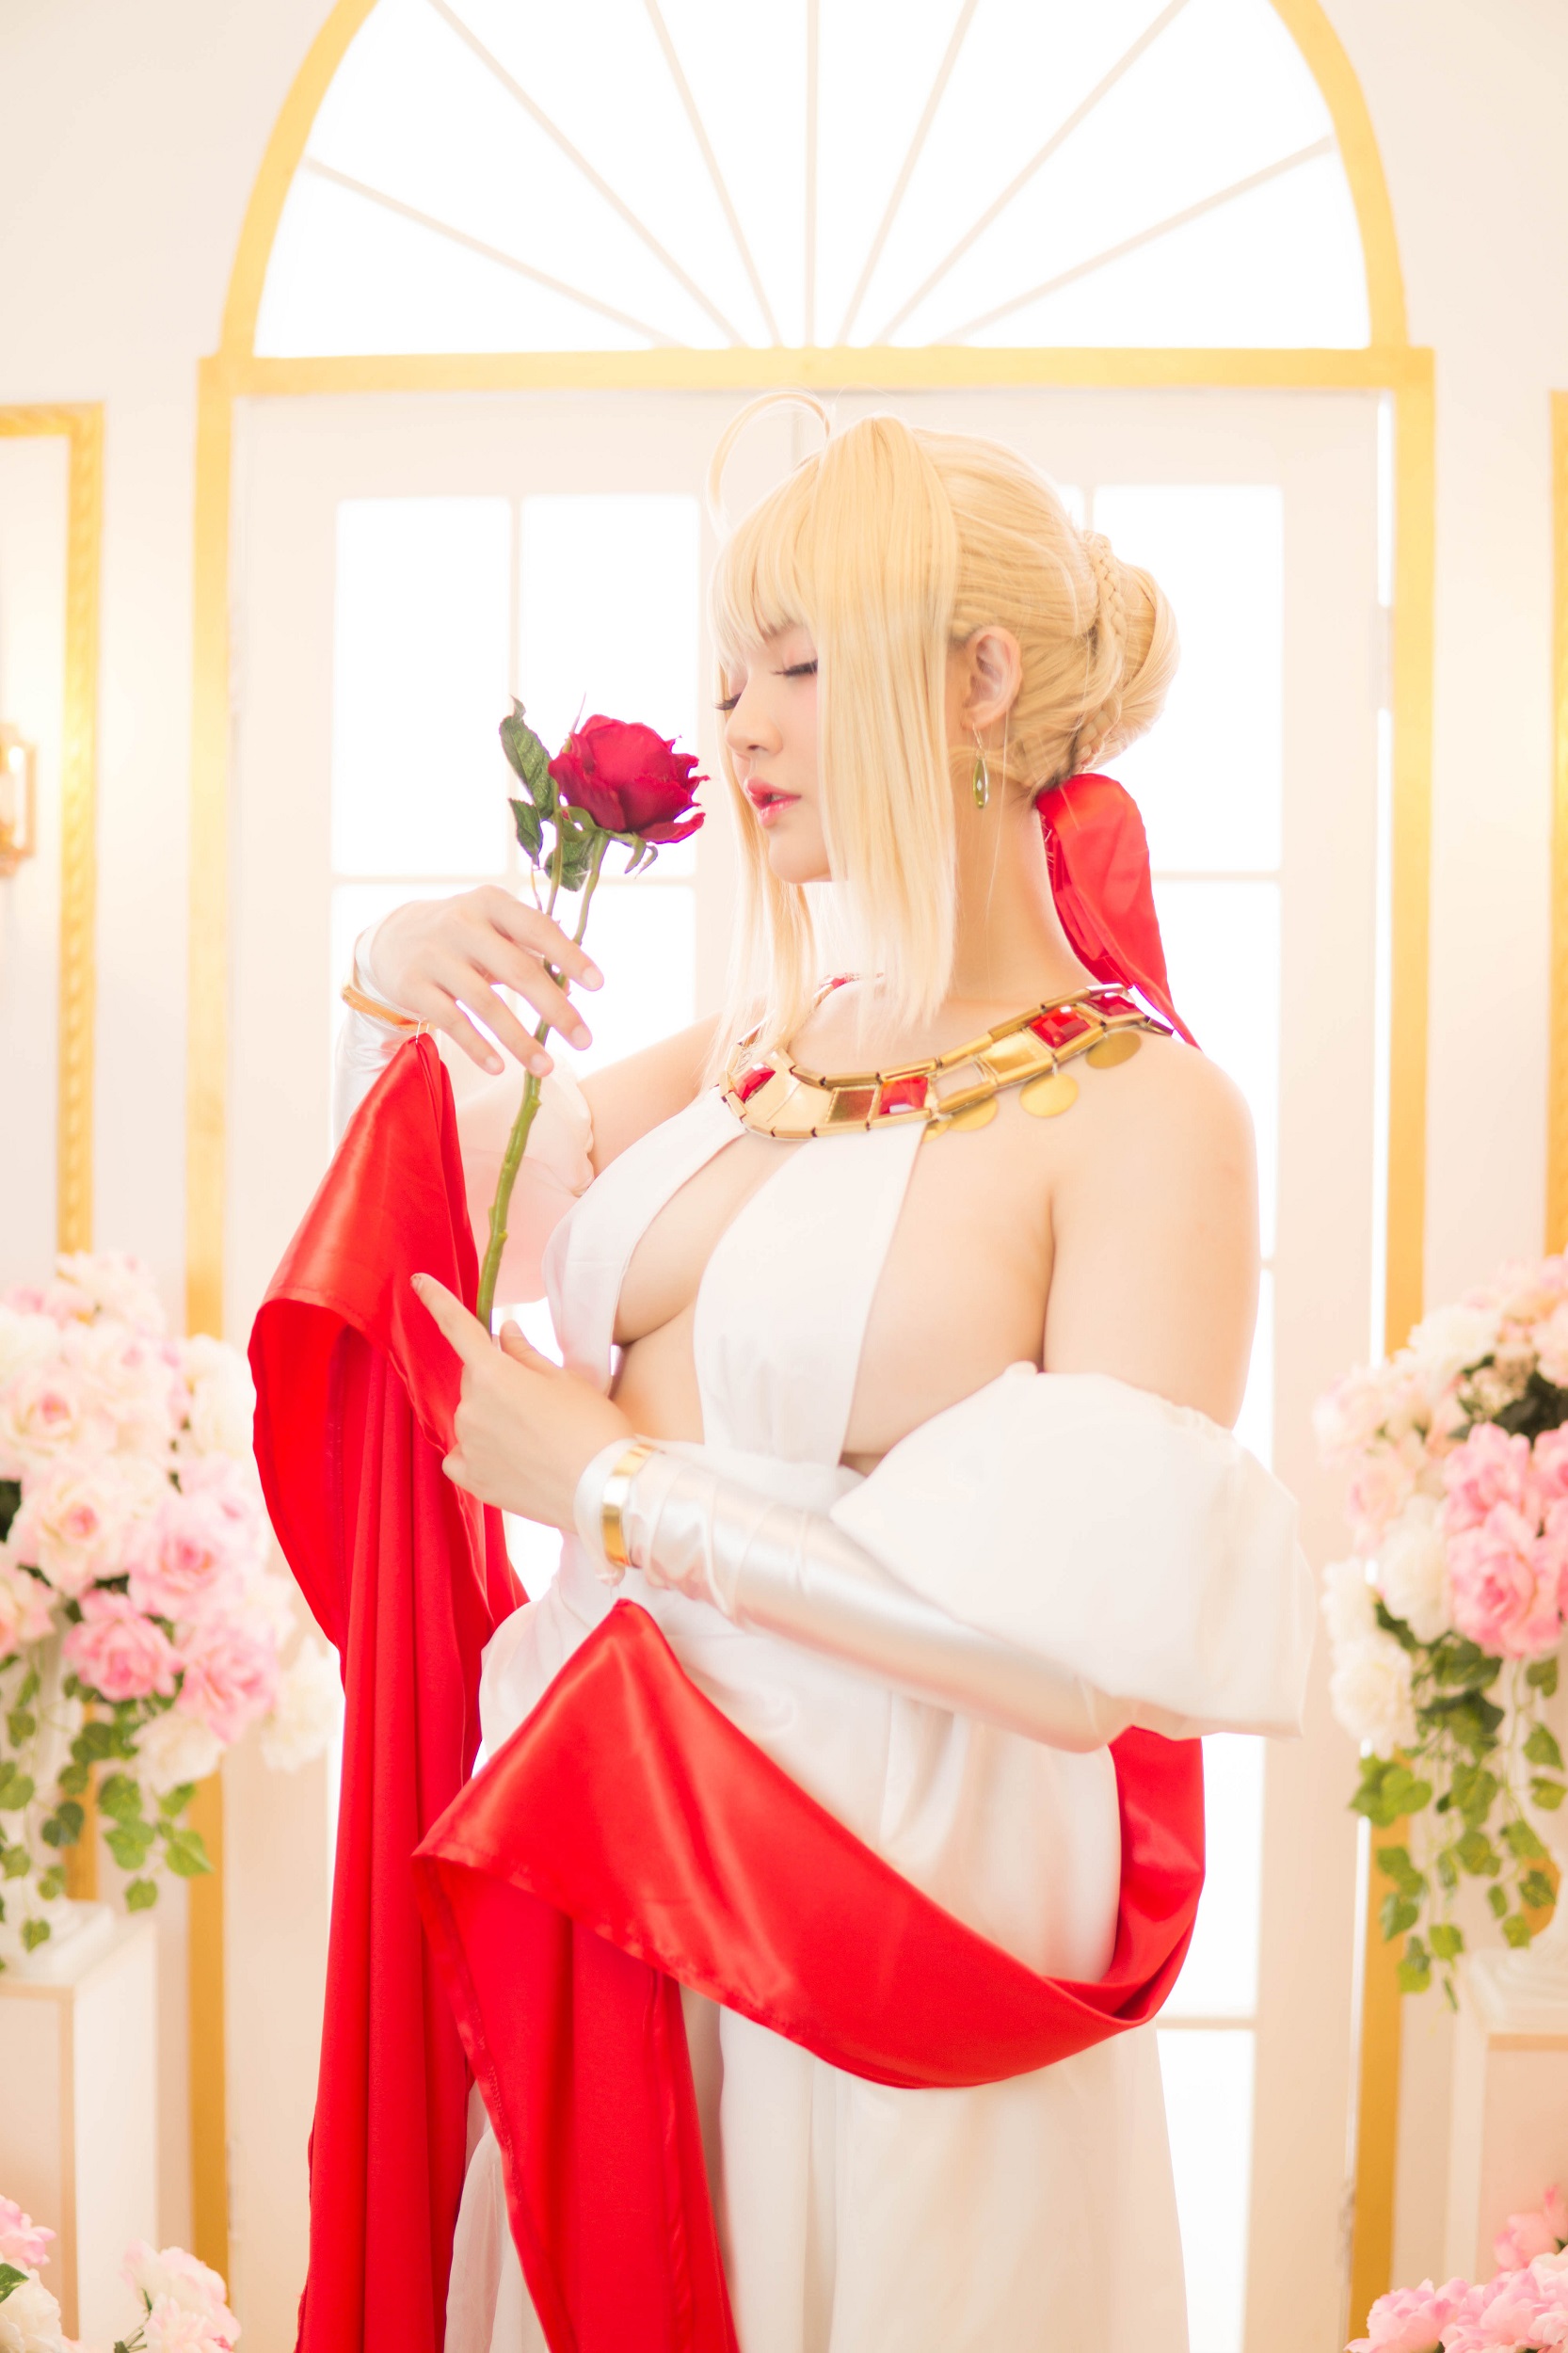 This is the sample picture from Ying Tze - Nero Dress post. Click here to see image full size.